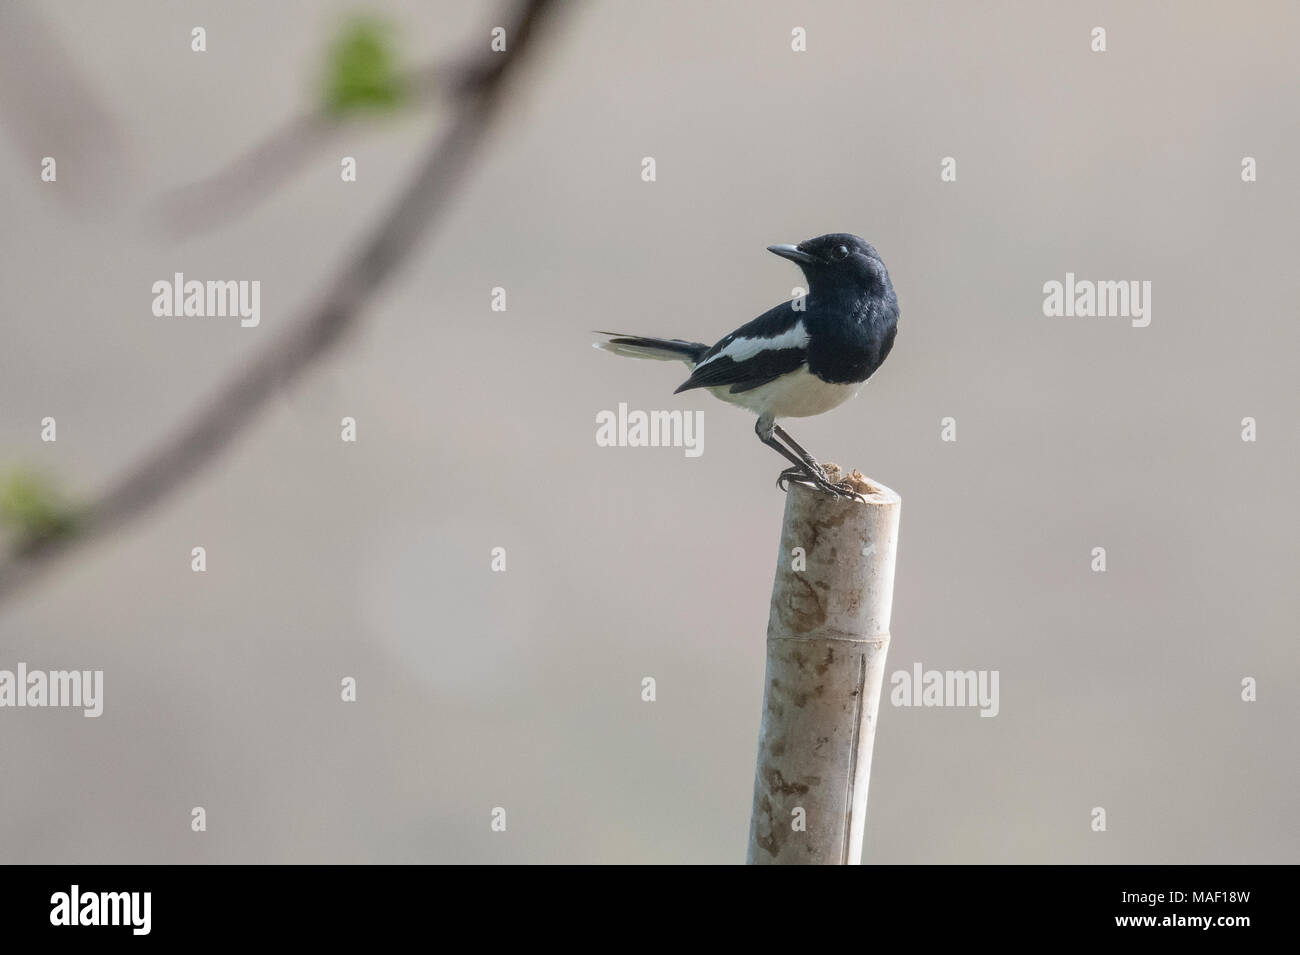 Oriental  Magpie Robin Perched on a Branch Stock Photo